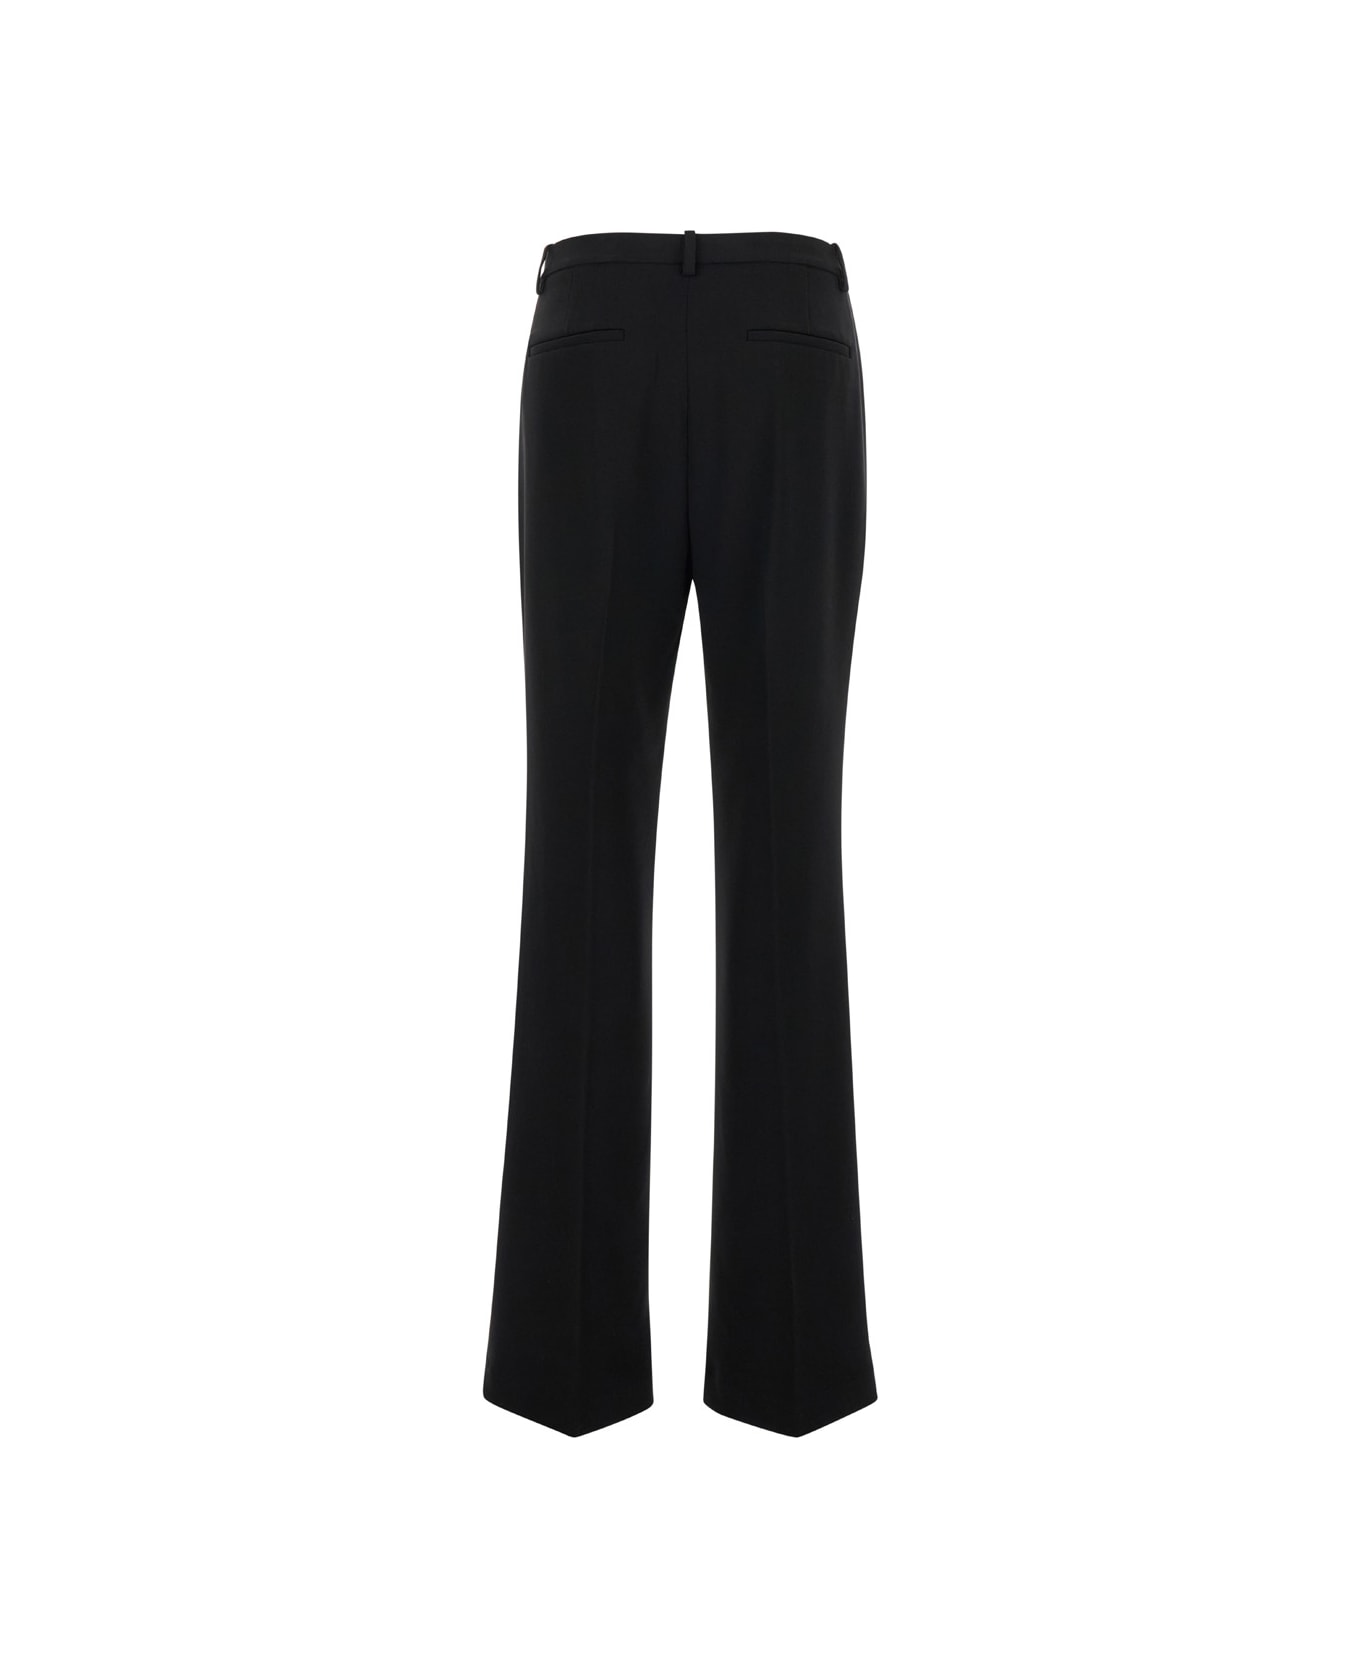 Theory Black Sartorial Pants With Stretch Pleat In Technical Fabric Woman - Black ボトムス